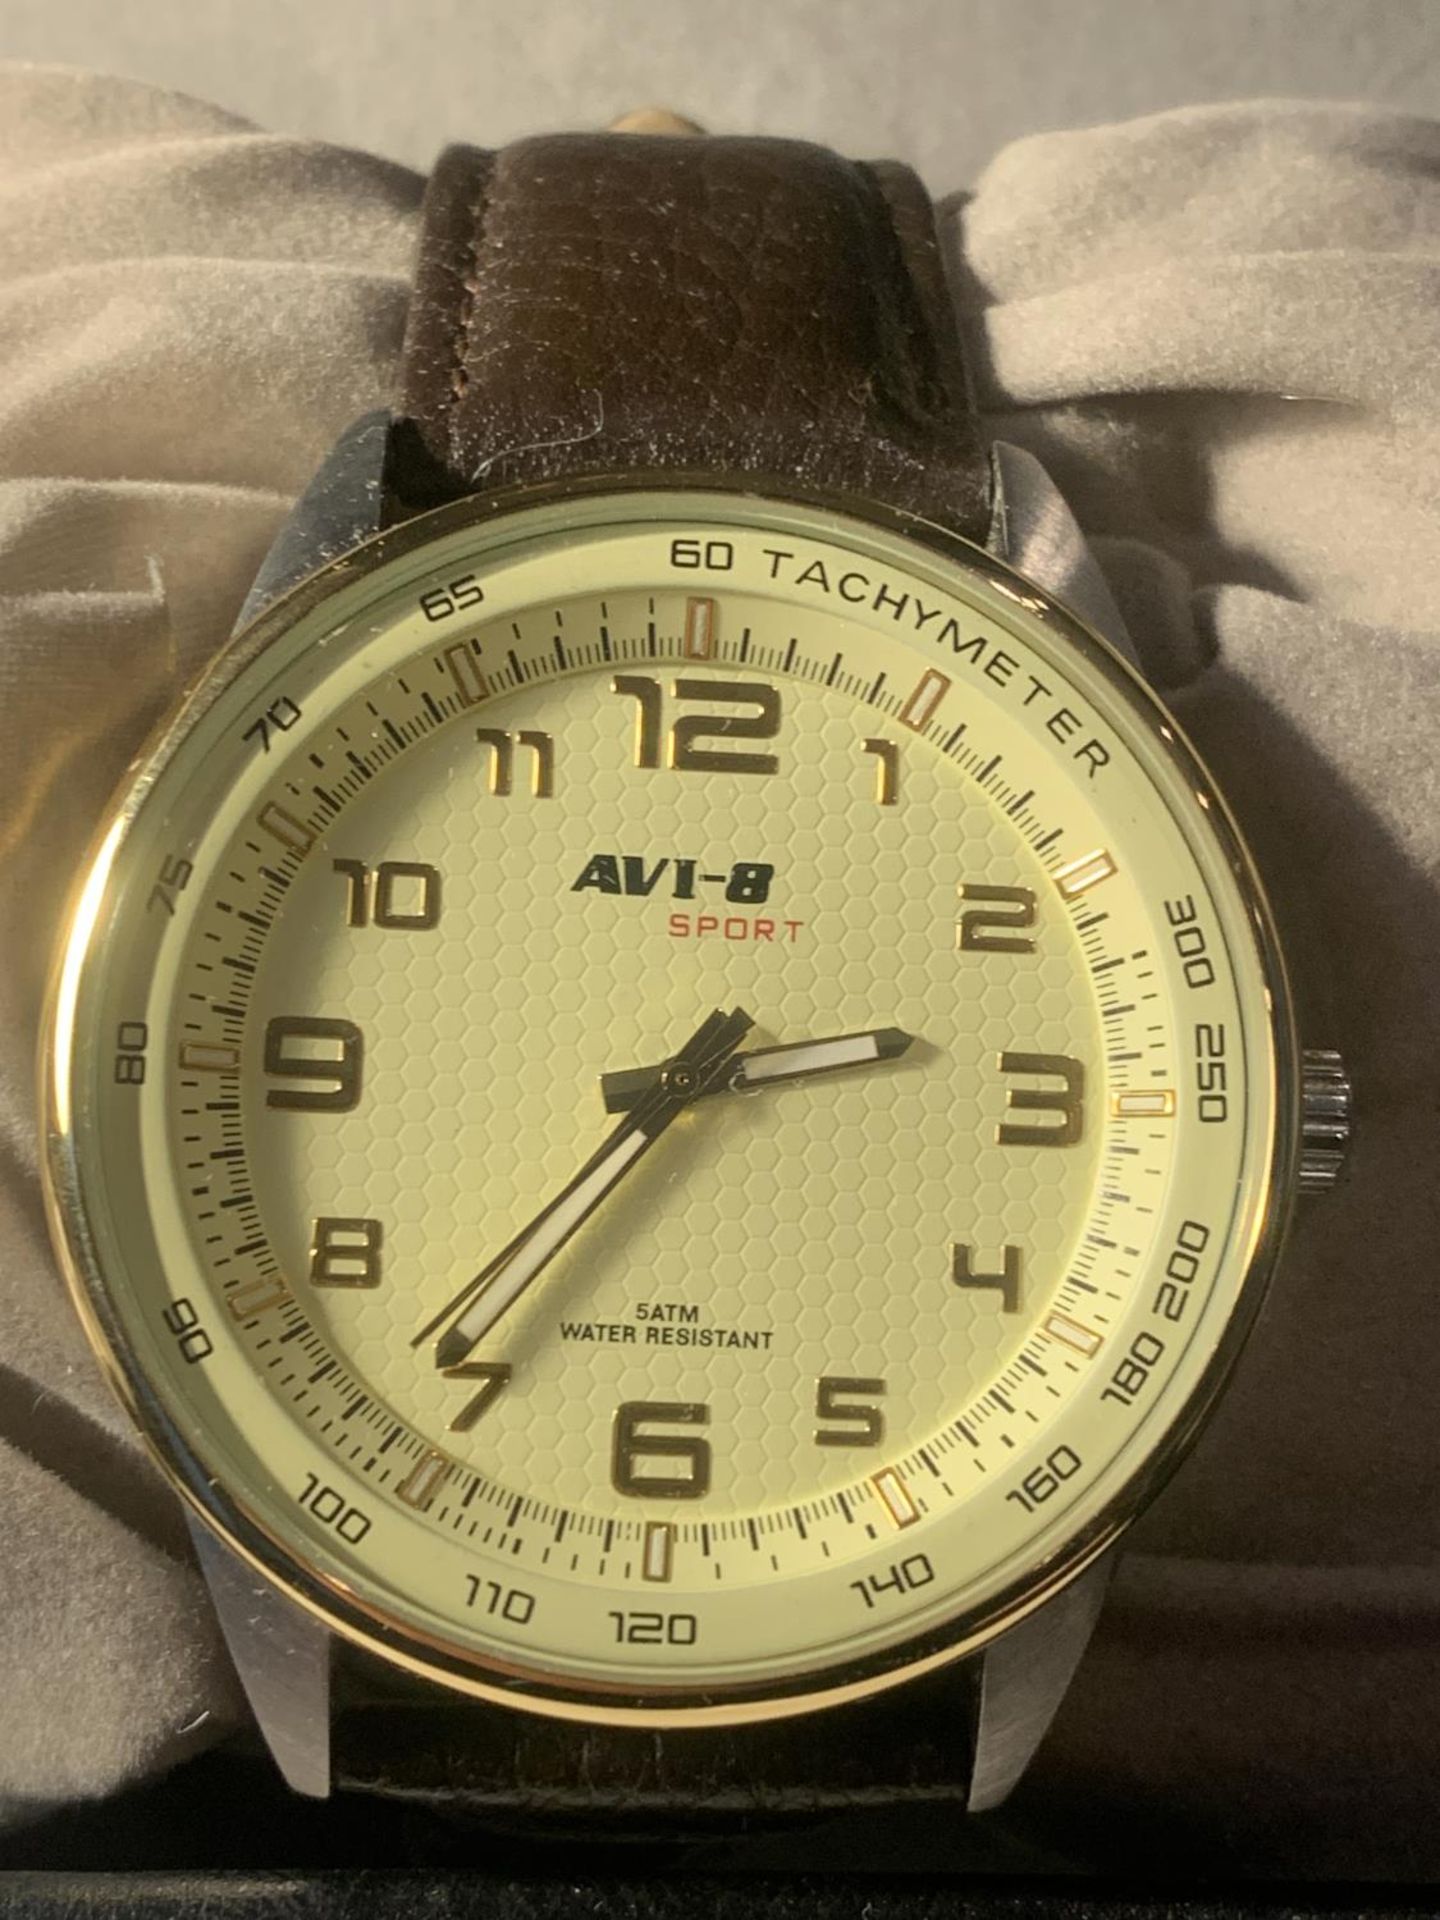 AN AS NEW AND BOXED AVI-8 SPORT TACHYMETER WATER RESISTANT WRIST WATCH SEEN WORKING BUT NO WARRANTY - Image 2 of 3